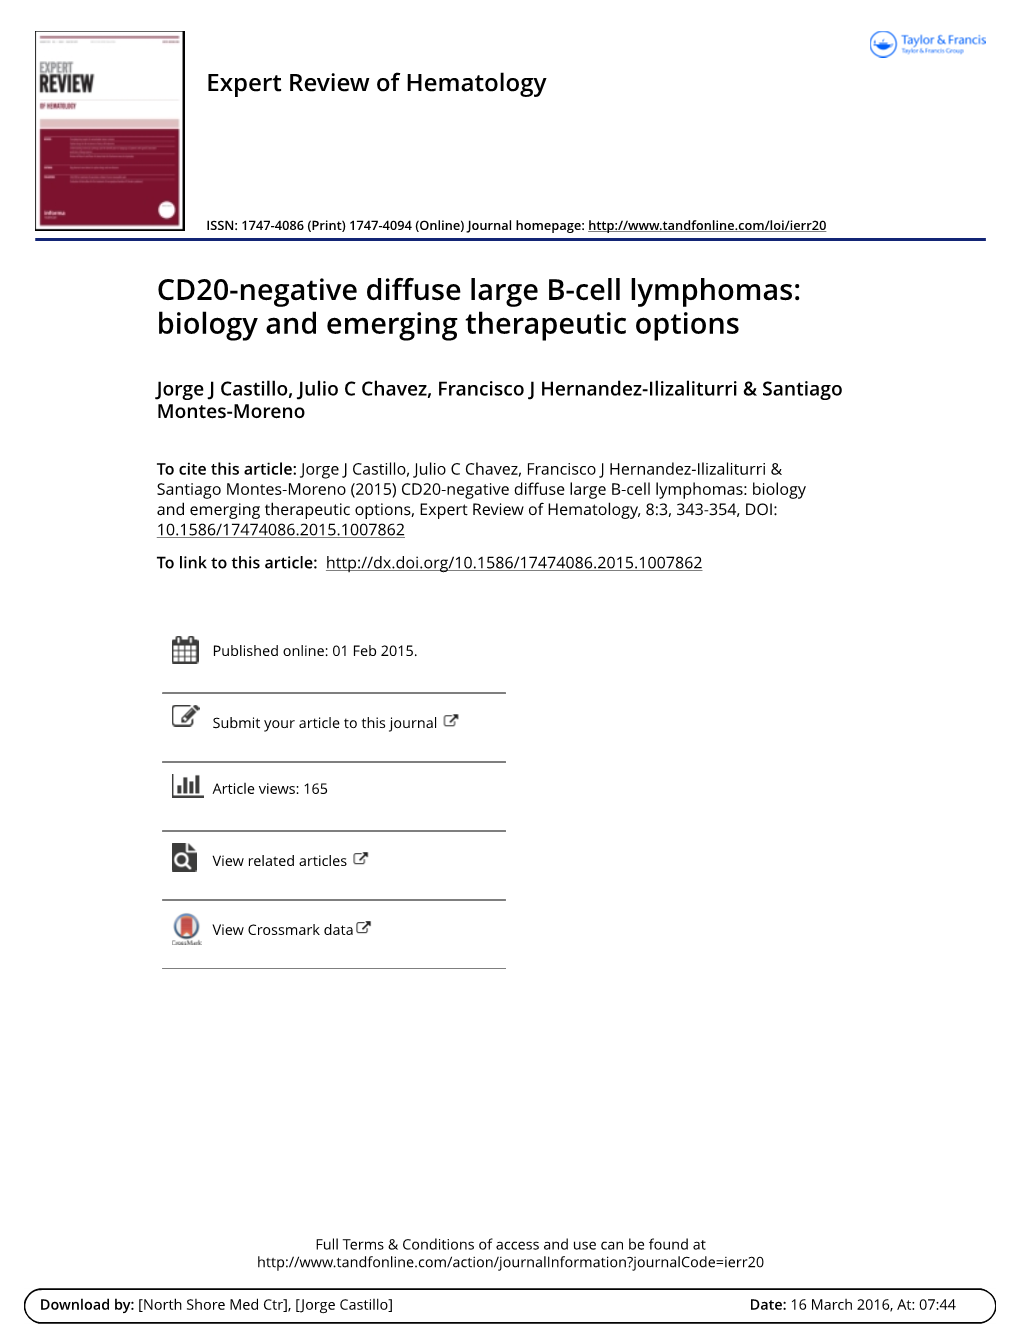 CD20-Negative Diffuse Large B-Cell Lymphomas: Biology and Emerging Therapeutic Options